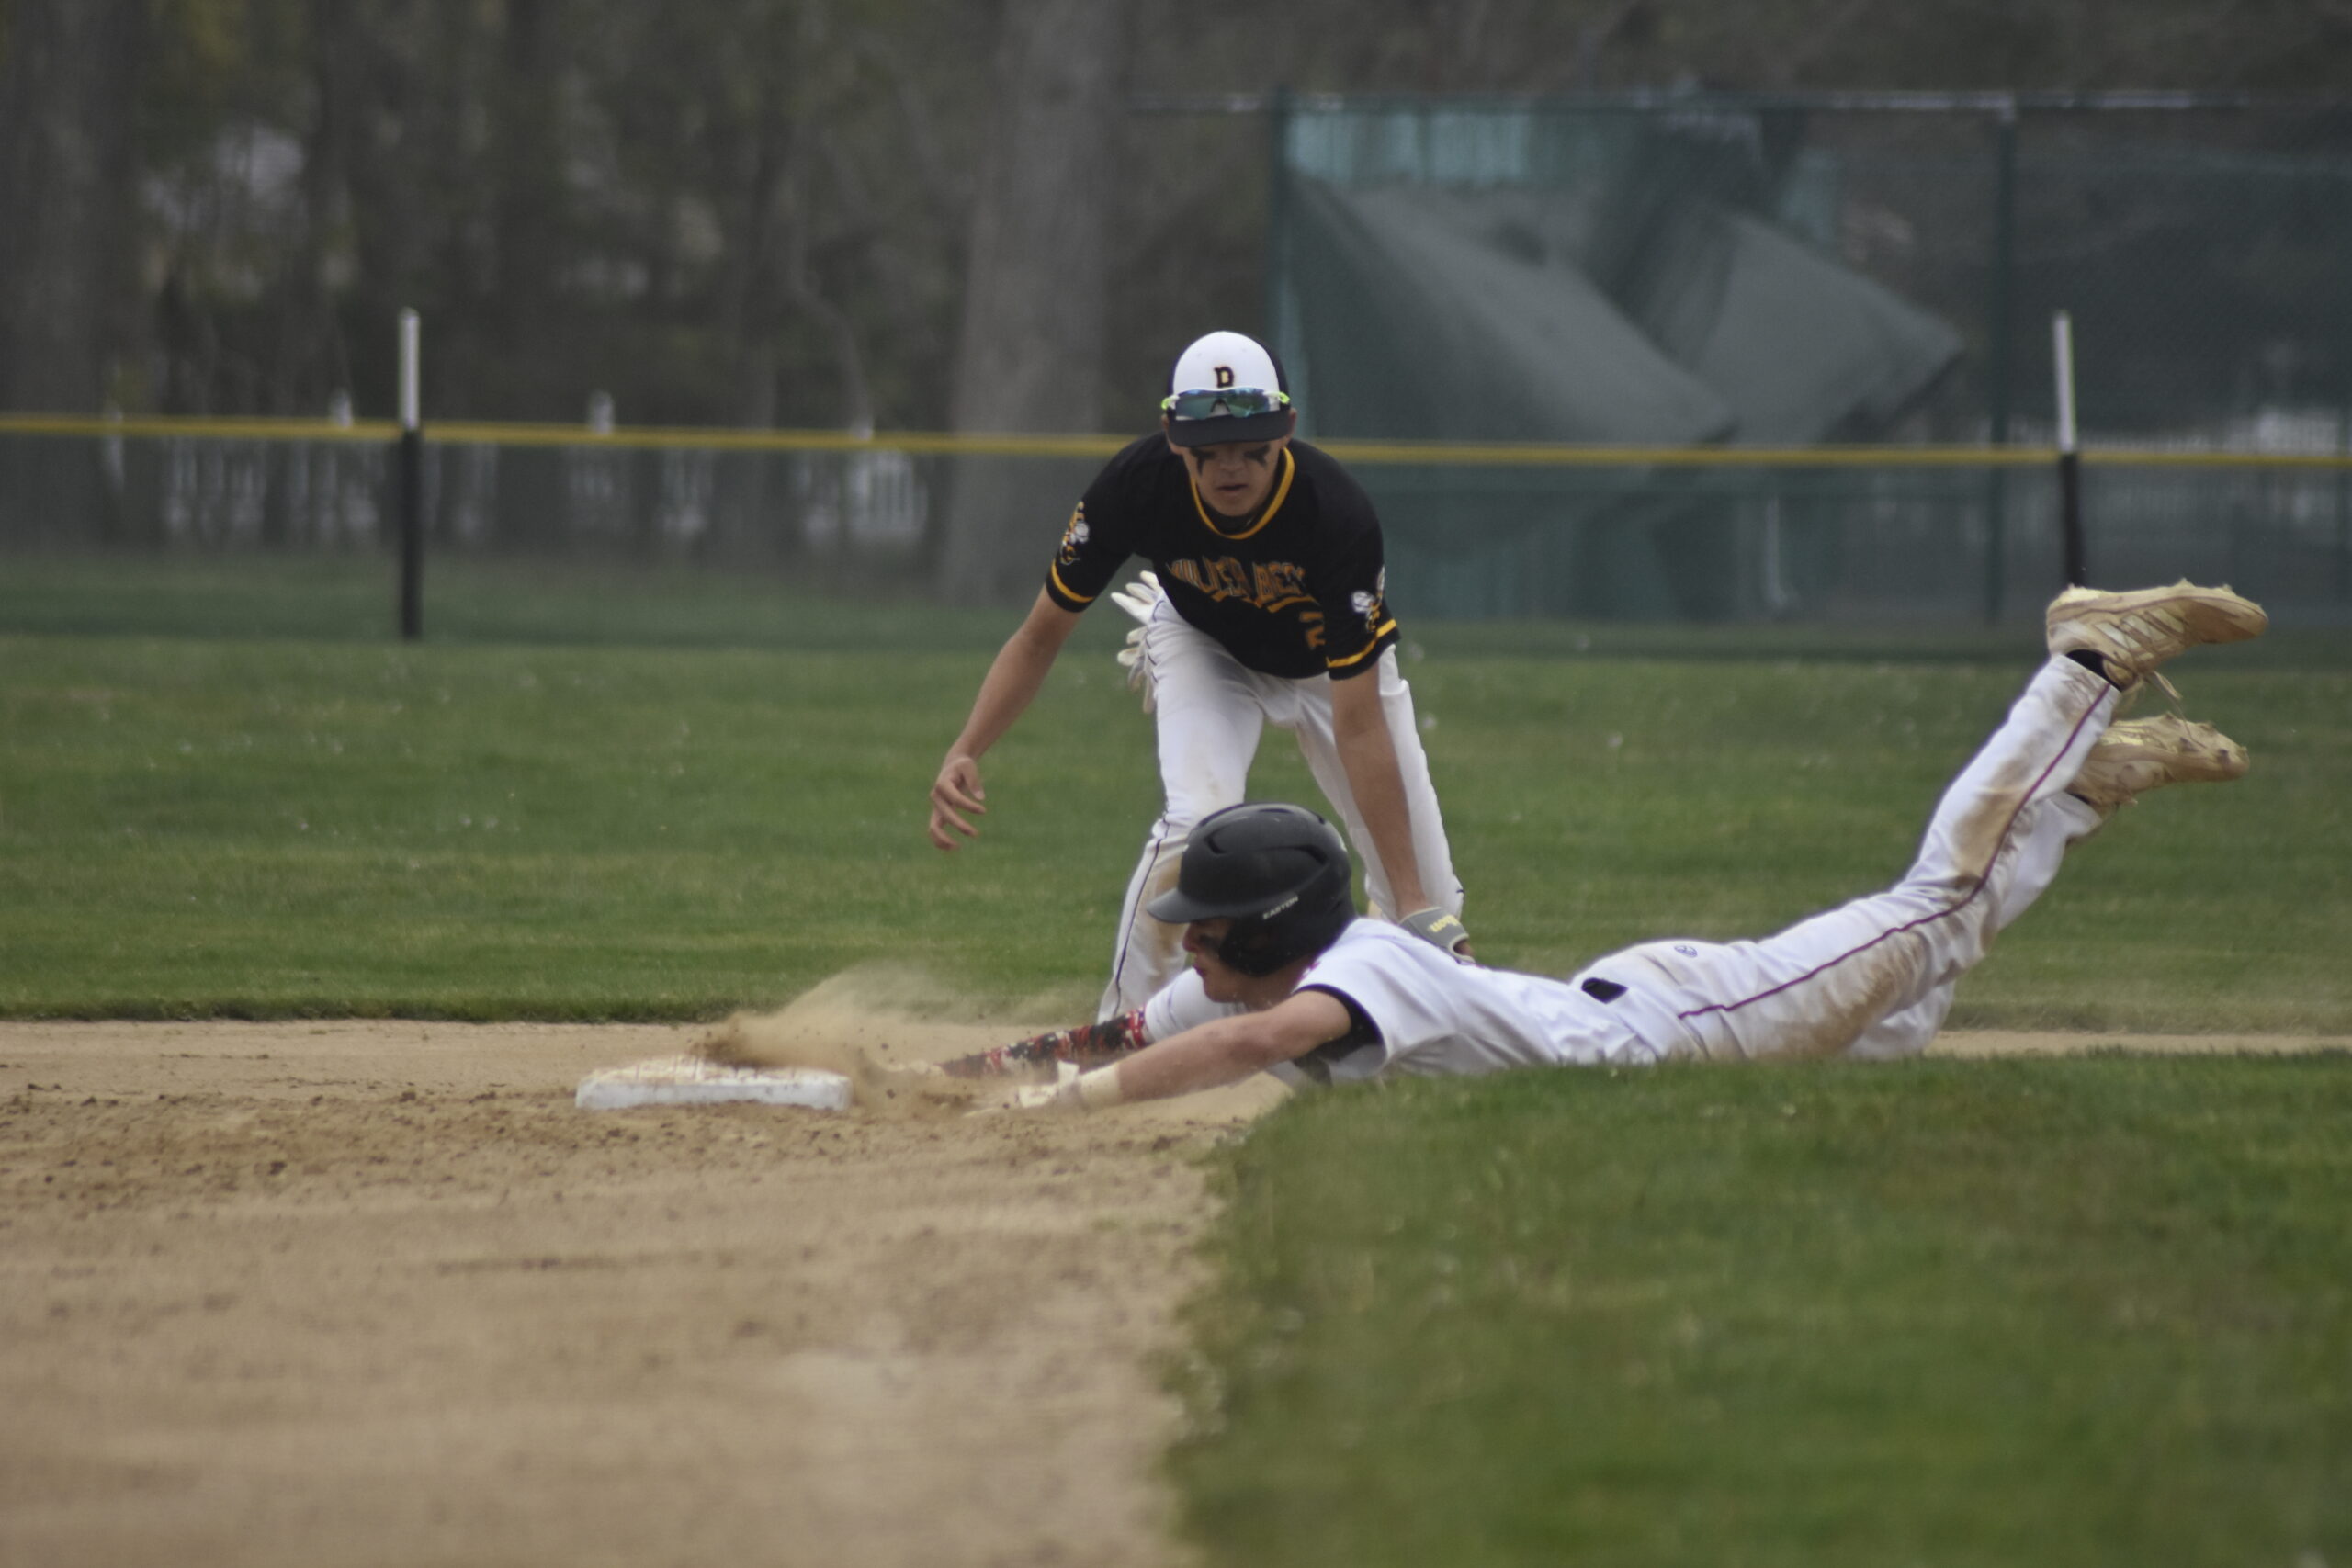 Gavin Gilbride slides in safely well ahead of the throw for a stole base.   DREW BUDD